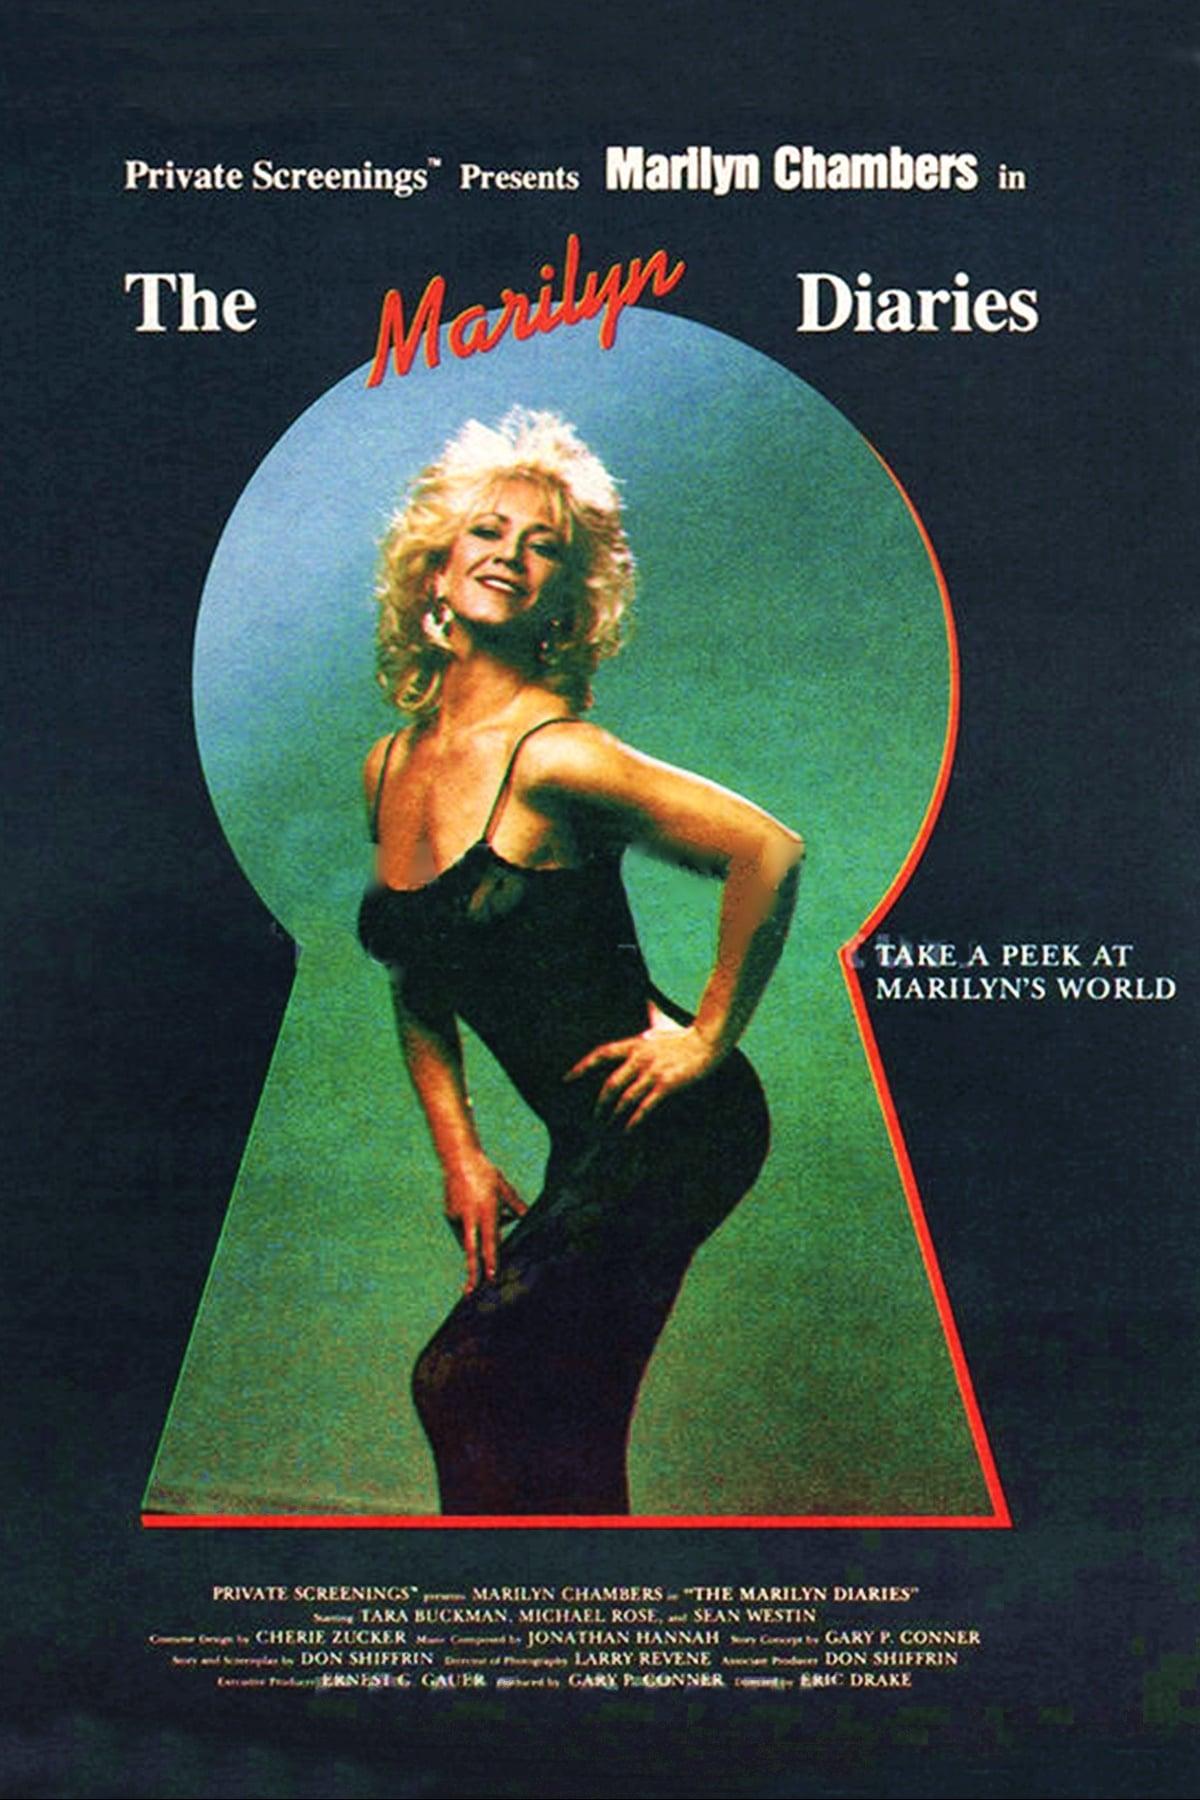 The Marilyn Diaries poster